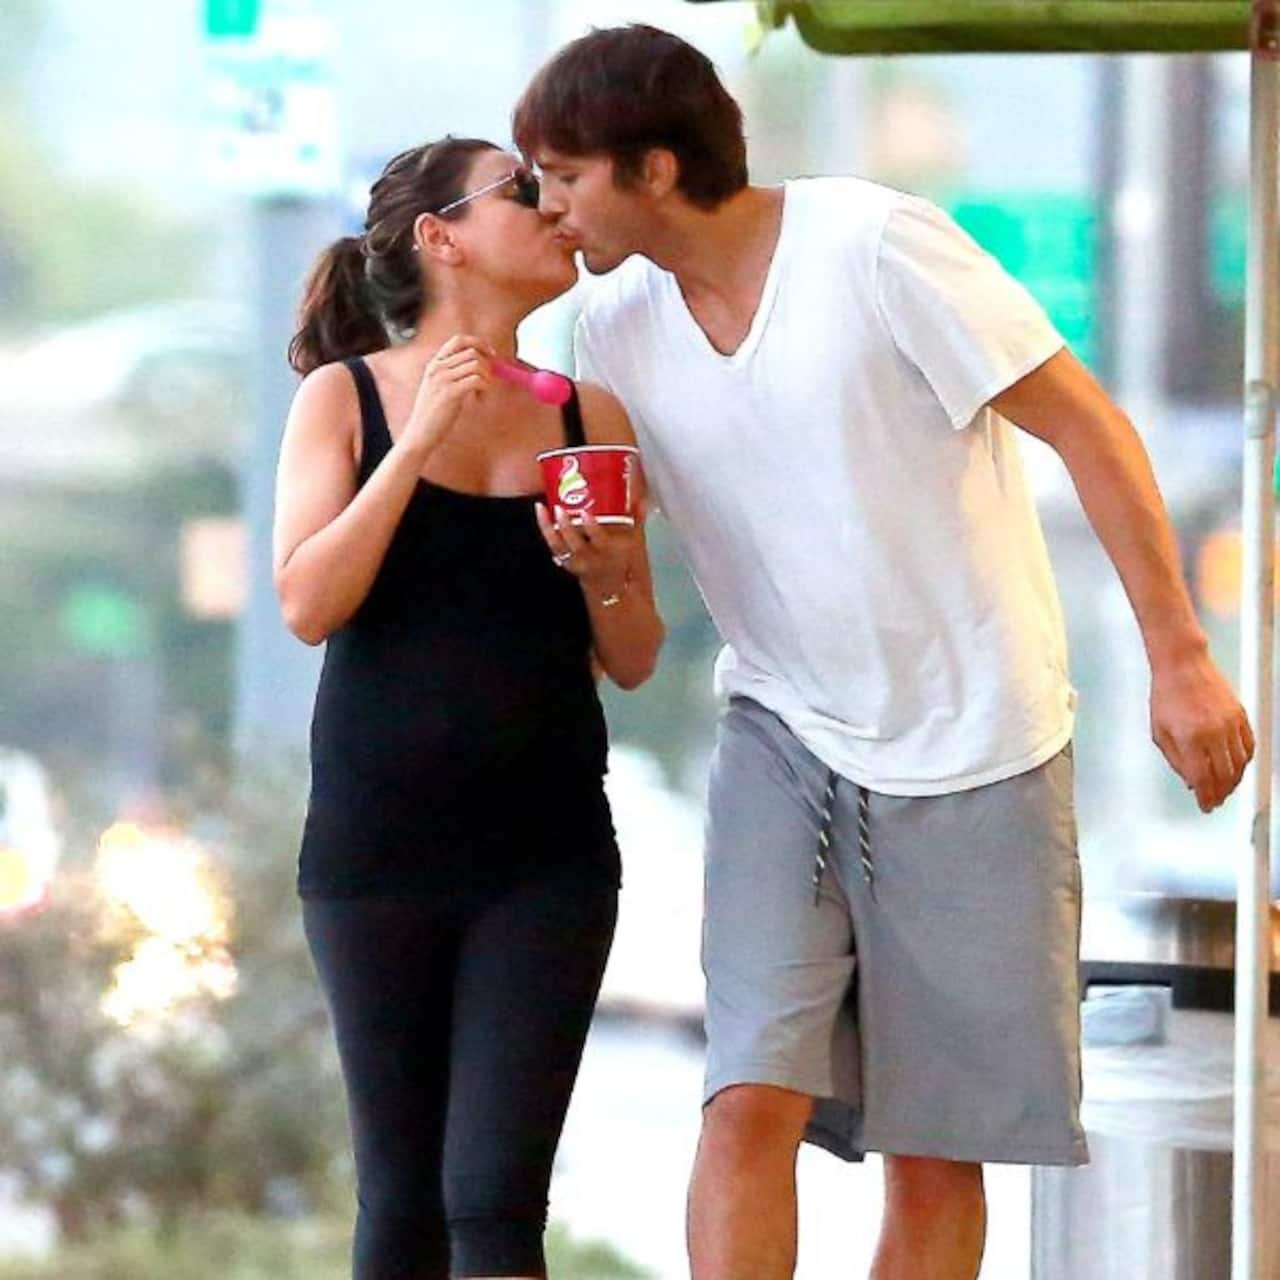 Weird And Silly Mila Kunis Reveals The Reason Why She And Ashton Kutcher Did The Super Bowl Ad